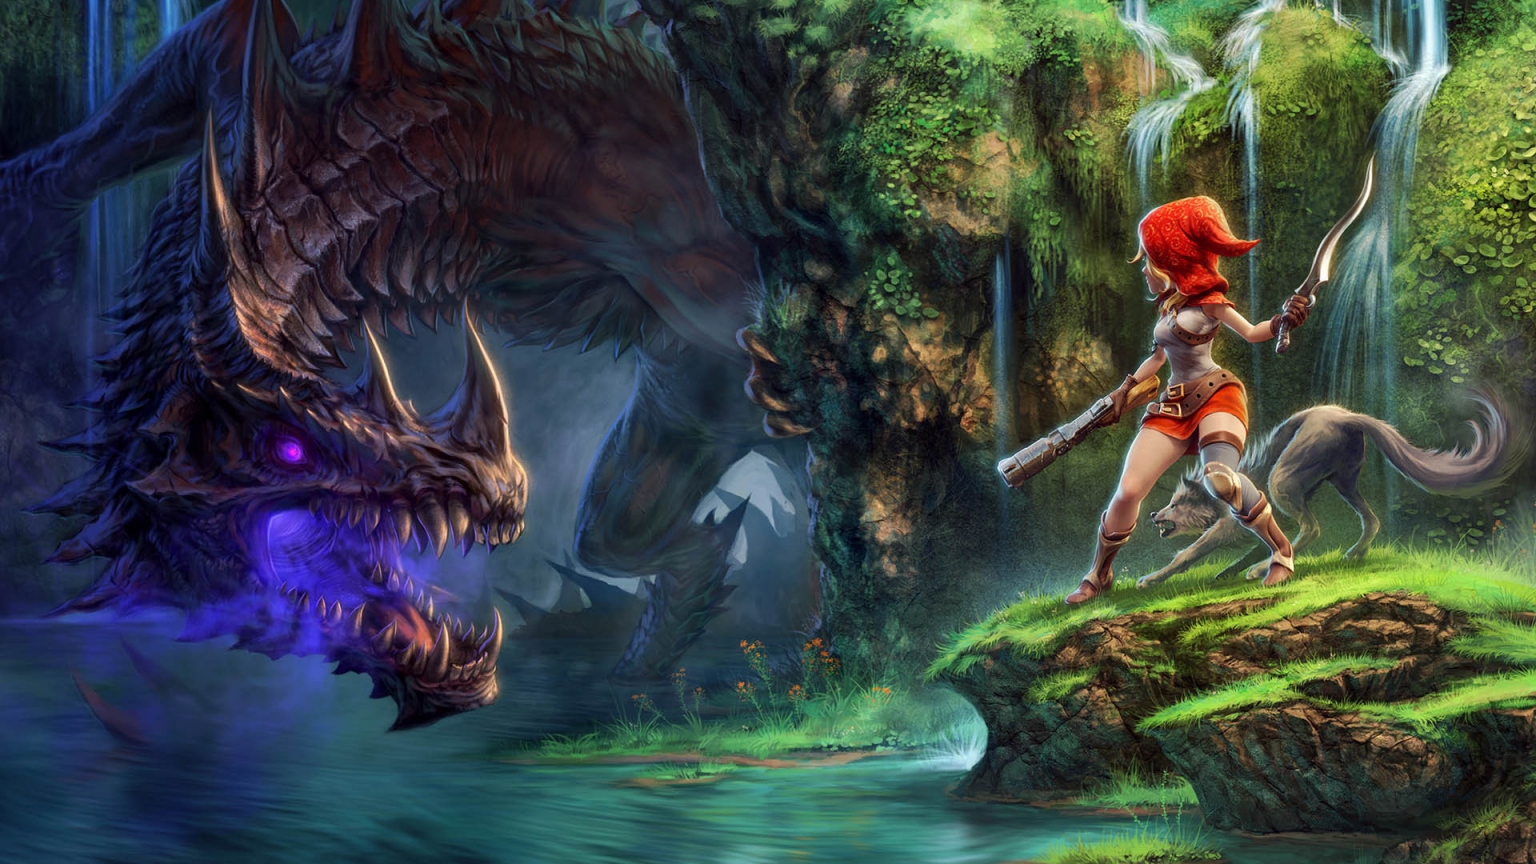 Dragon Fin Soup Game for 1536 x 864 HDTV resolution